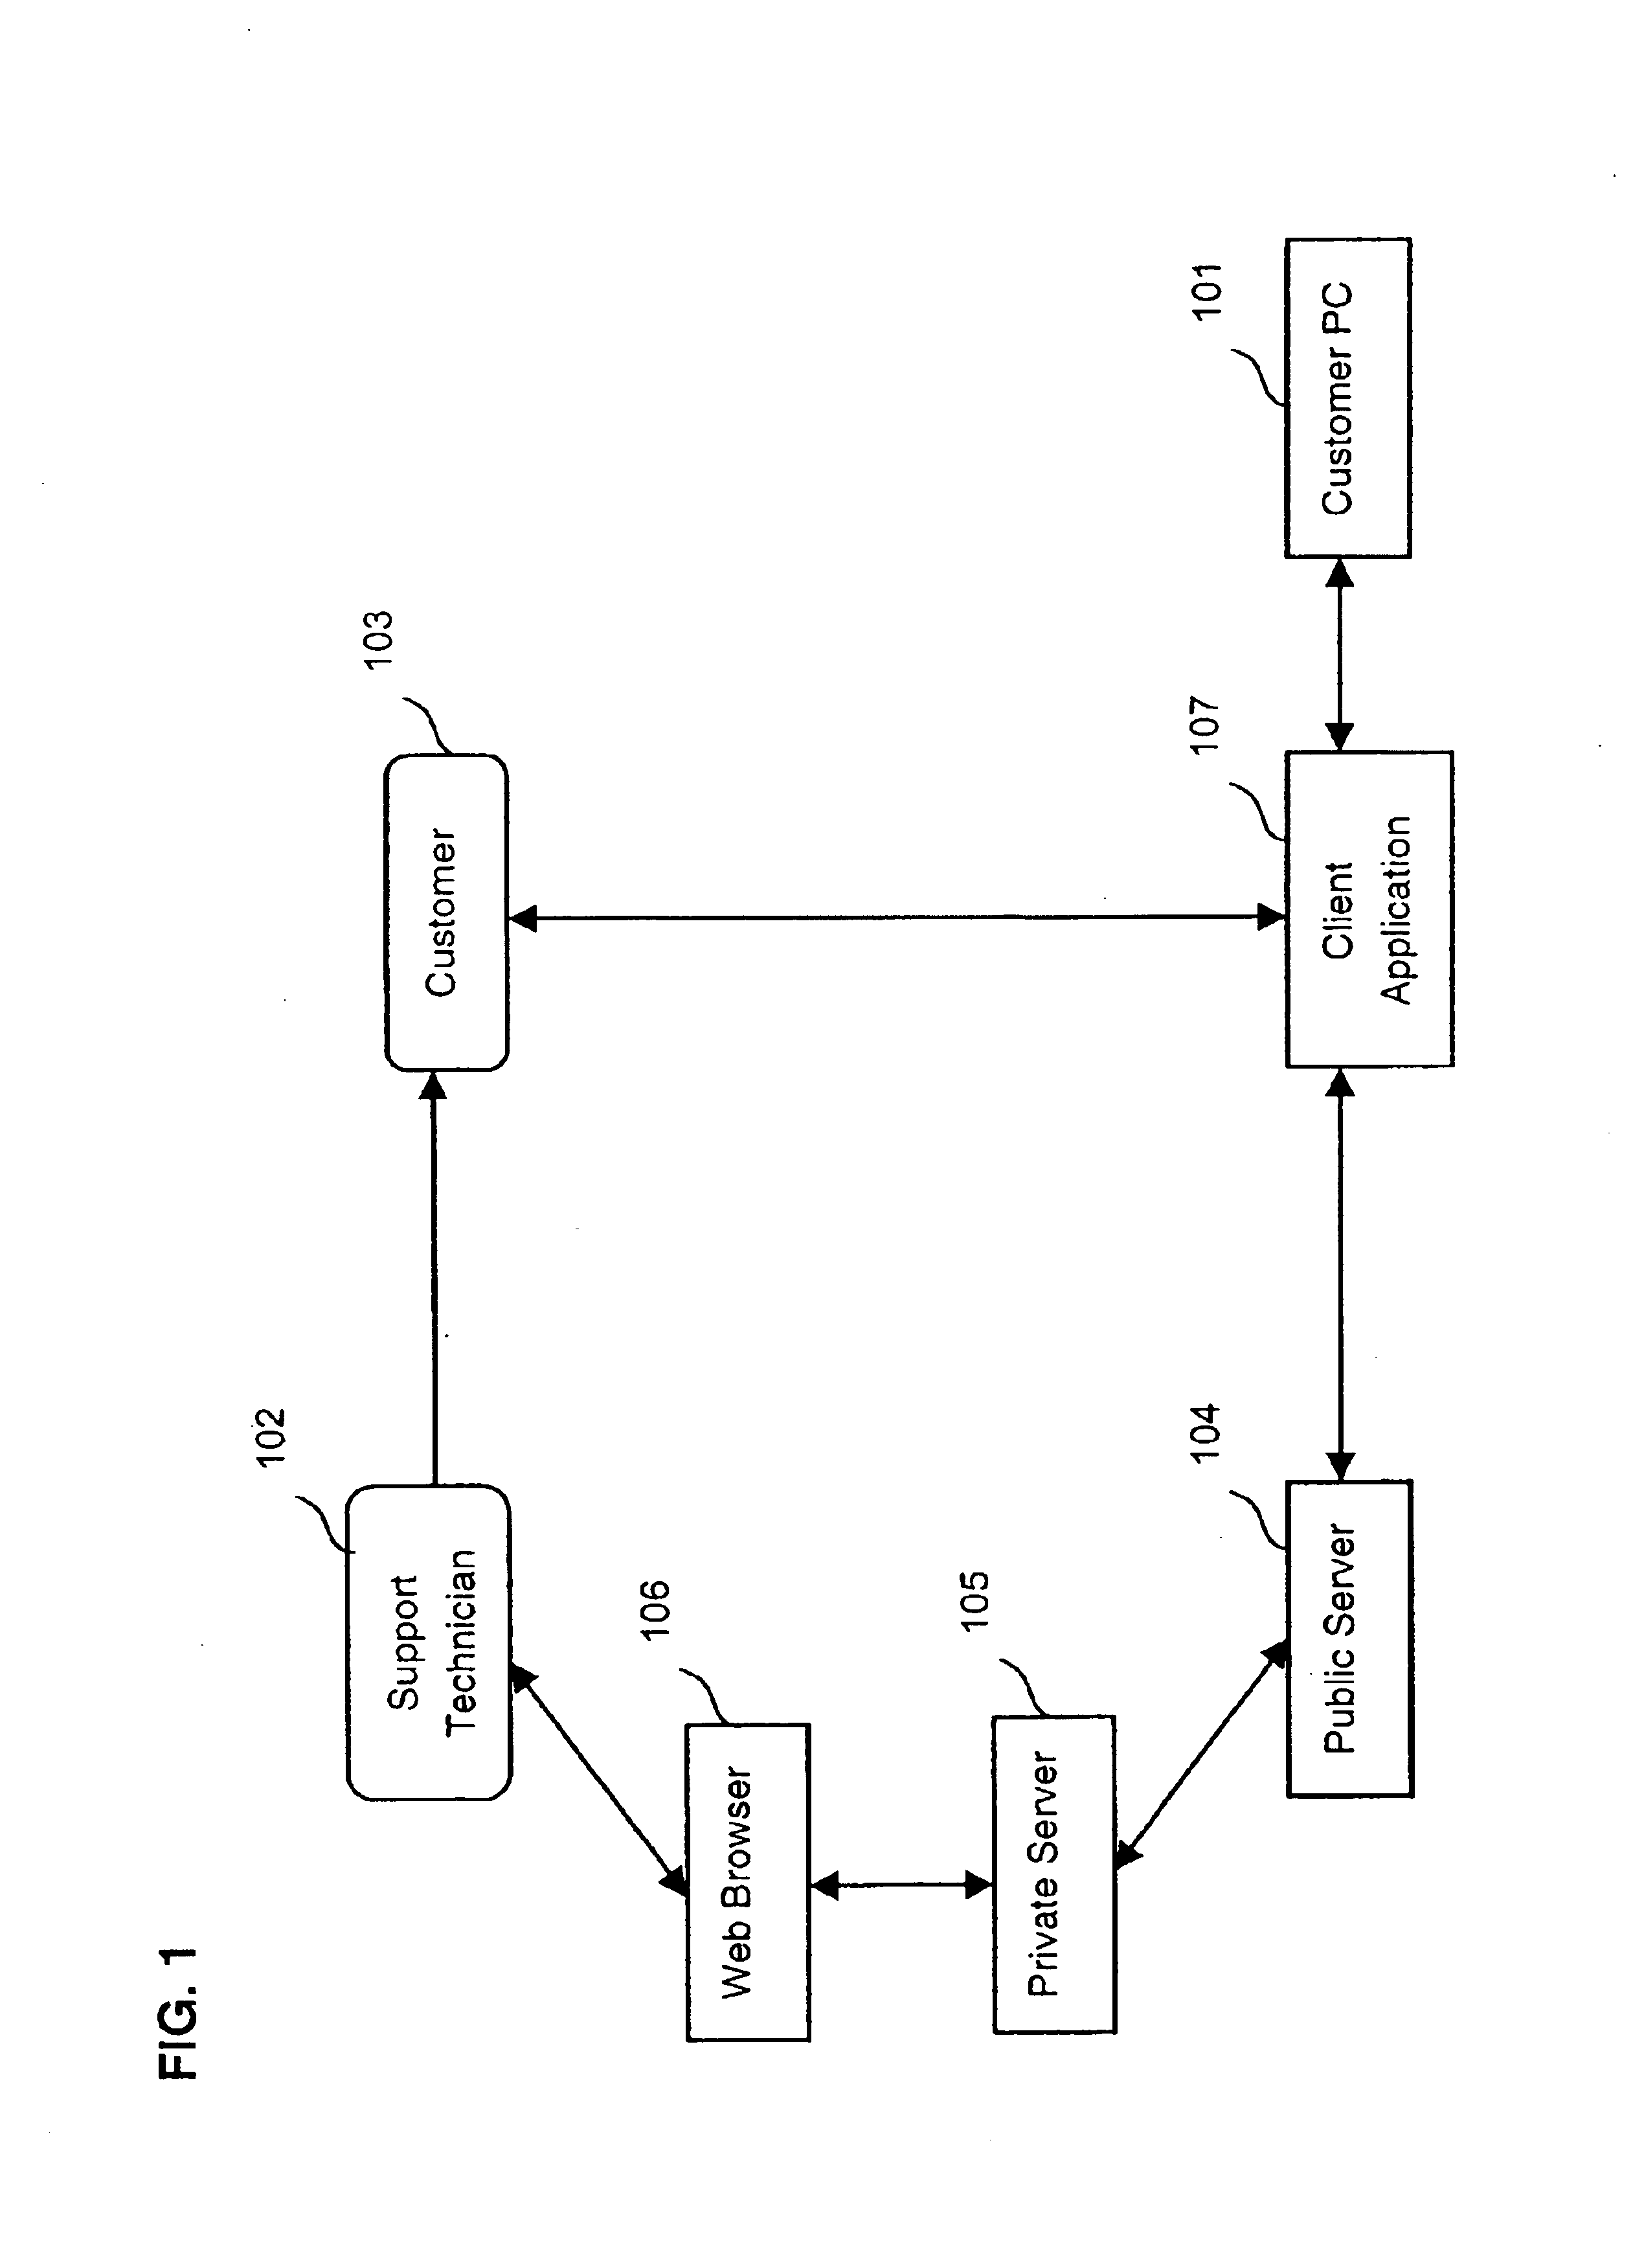 Method to remotely query, safely measure, and securely communicate configuration information of a networked computational device